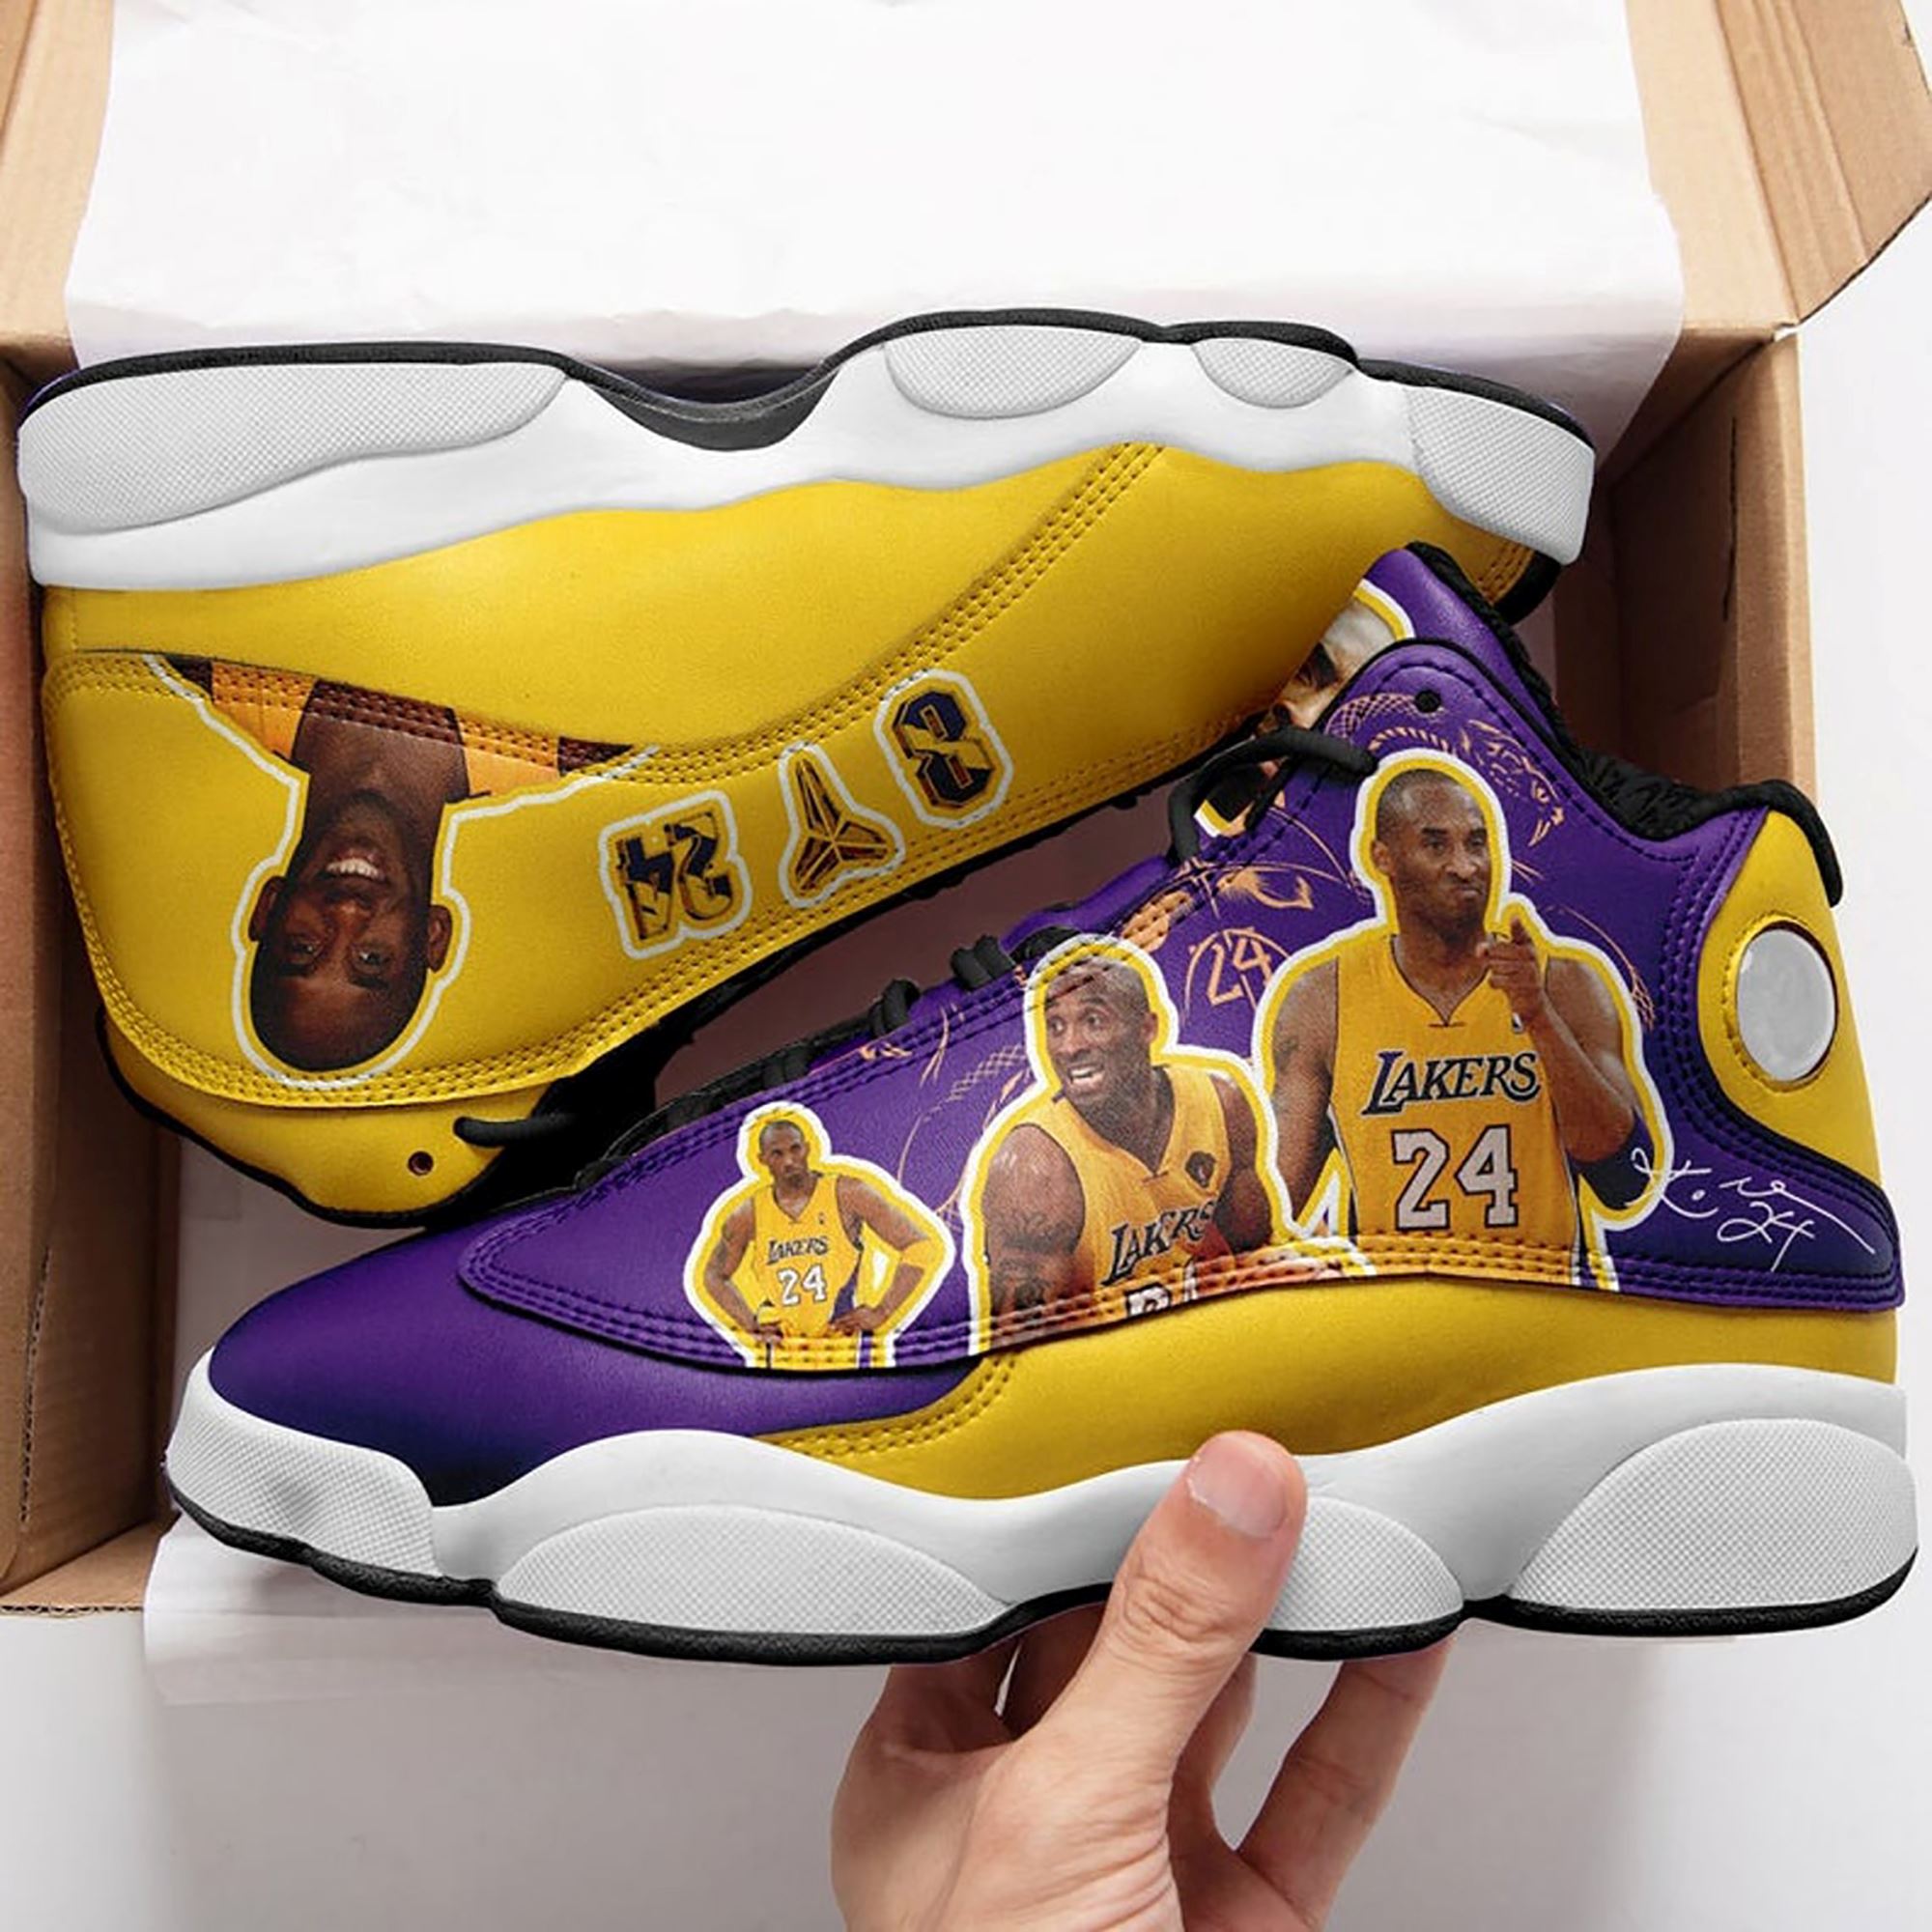 Lakers 24 Air Jd13 Shoes Kobe Bryant Leather Shoes Basketball Players Lover Gift Kobe Bryant Fans Gift Running Shoes Men Gift